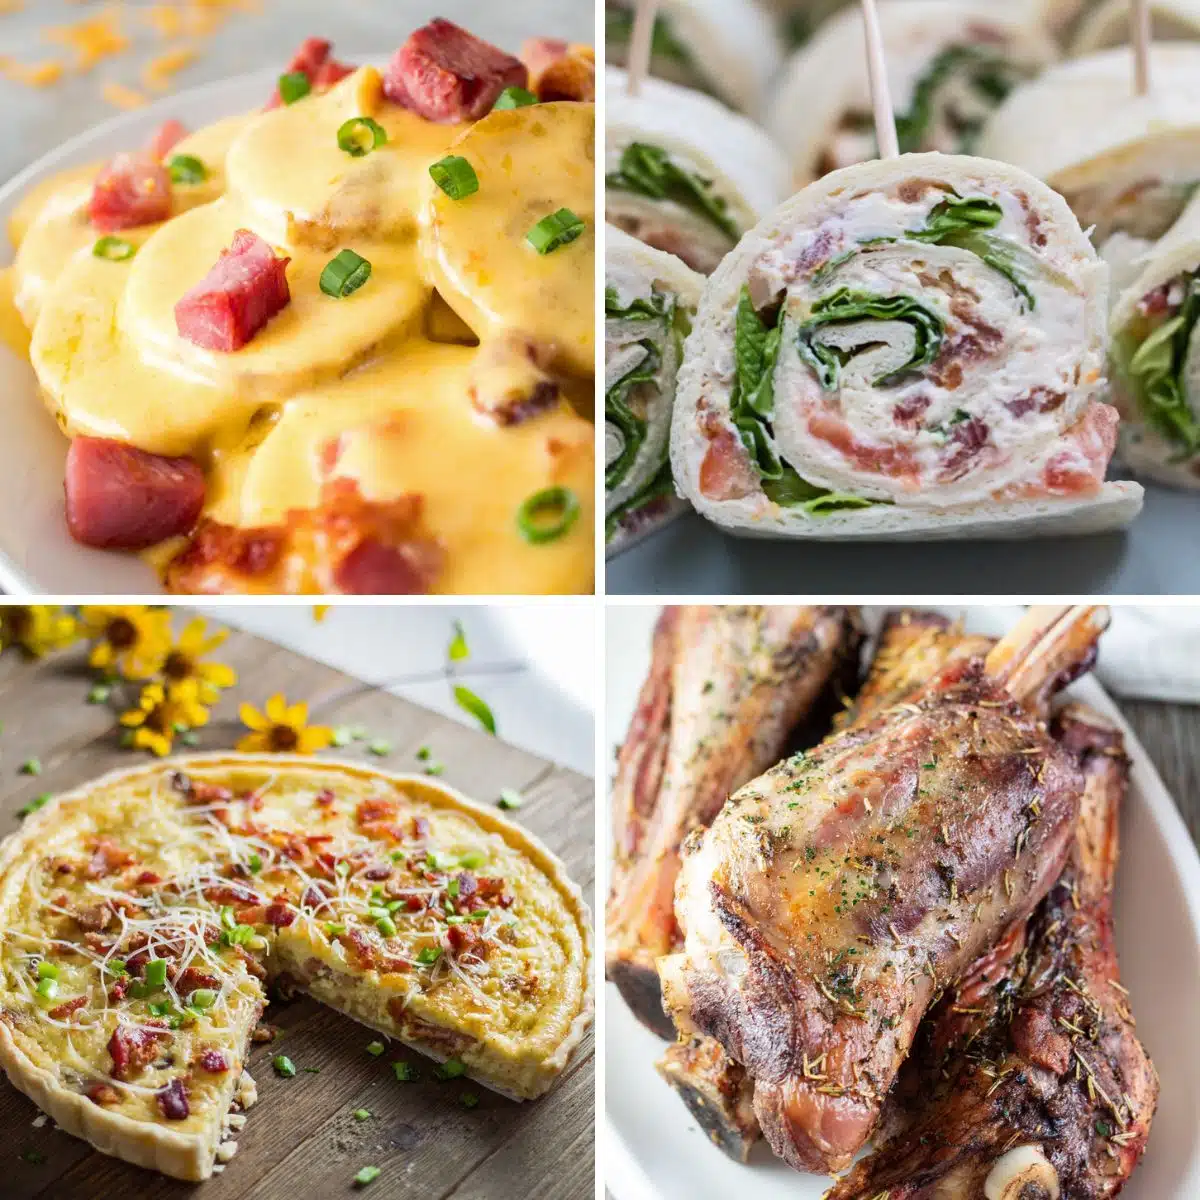 Best Easter Lunch Ideas: 21+ Tasty Recipes To Make This Year